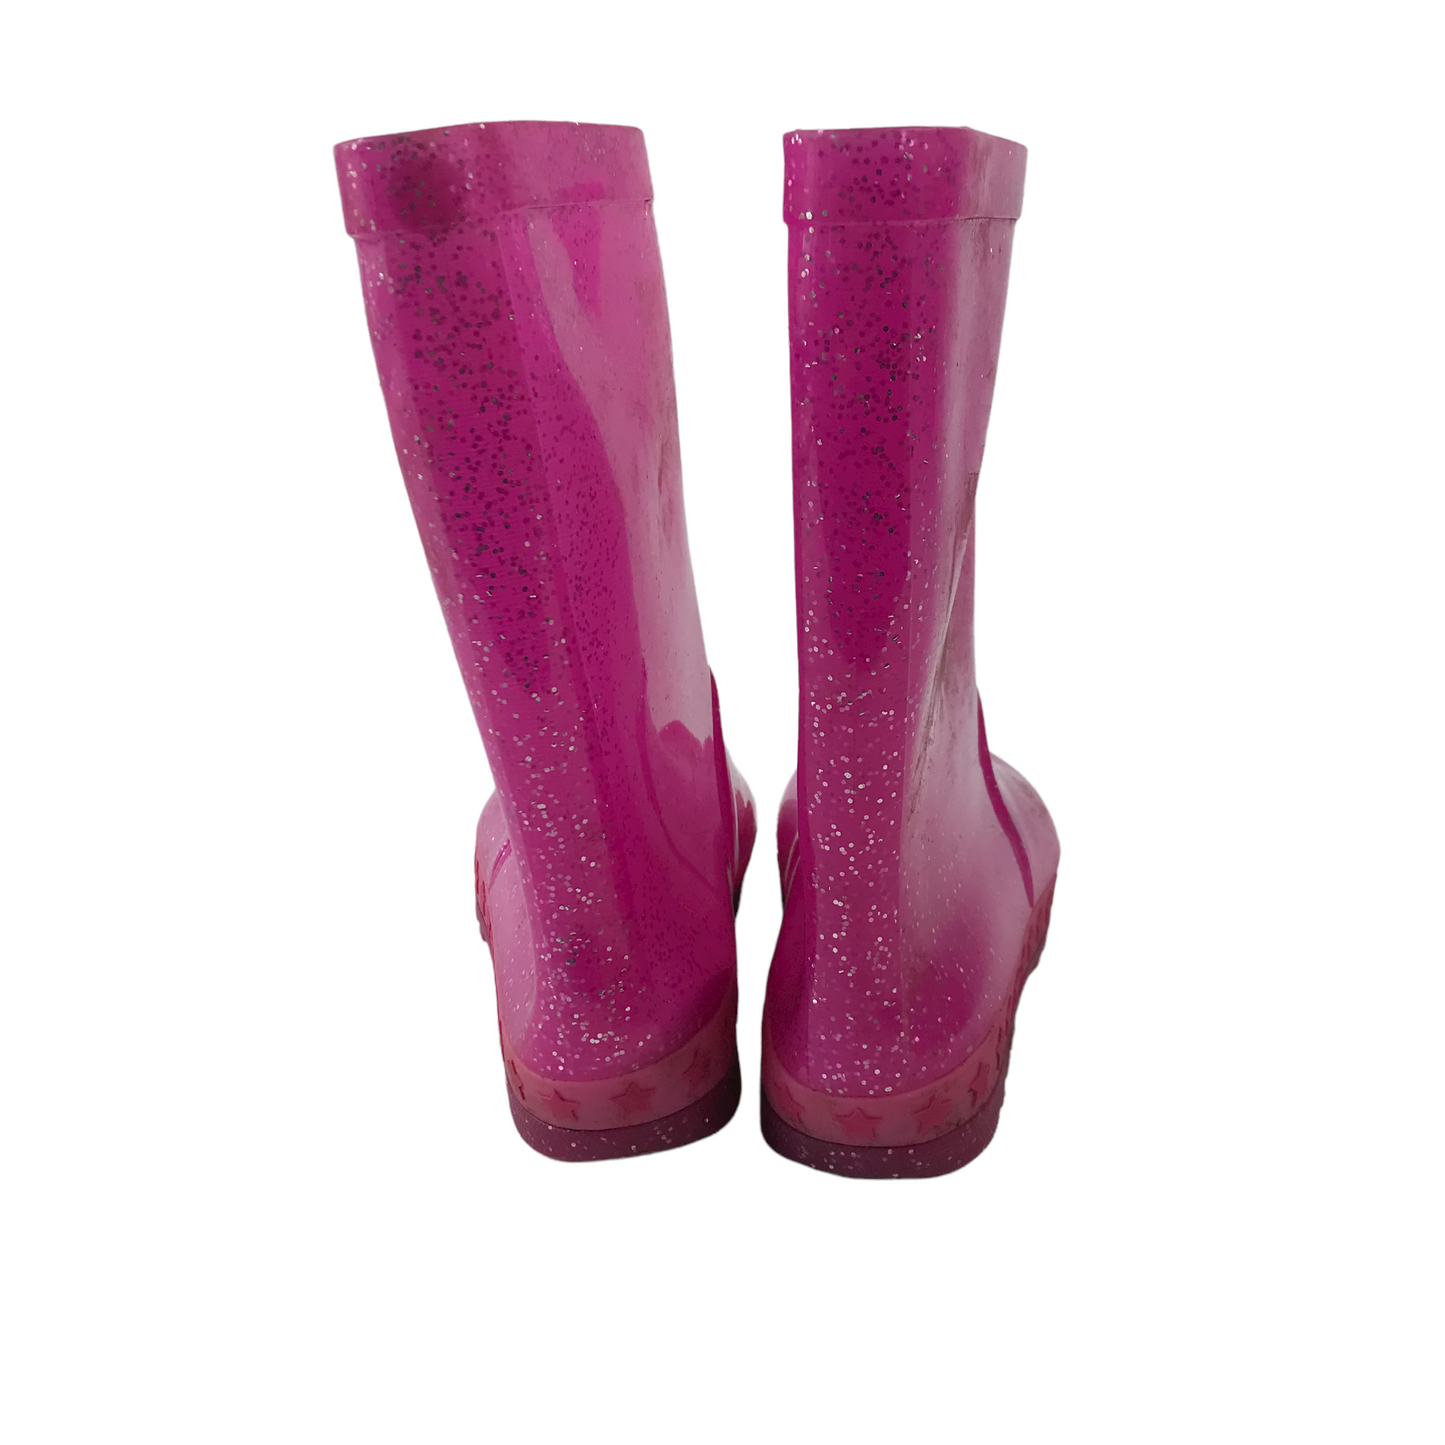 Nutmeg Pink Sparkly Wellies Shoe Size 2